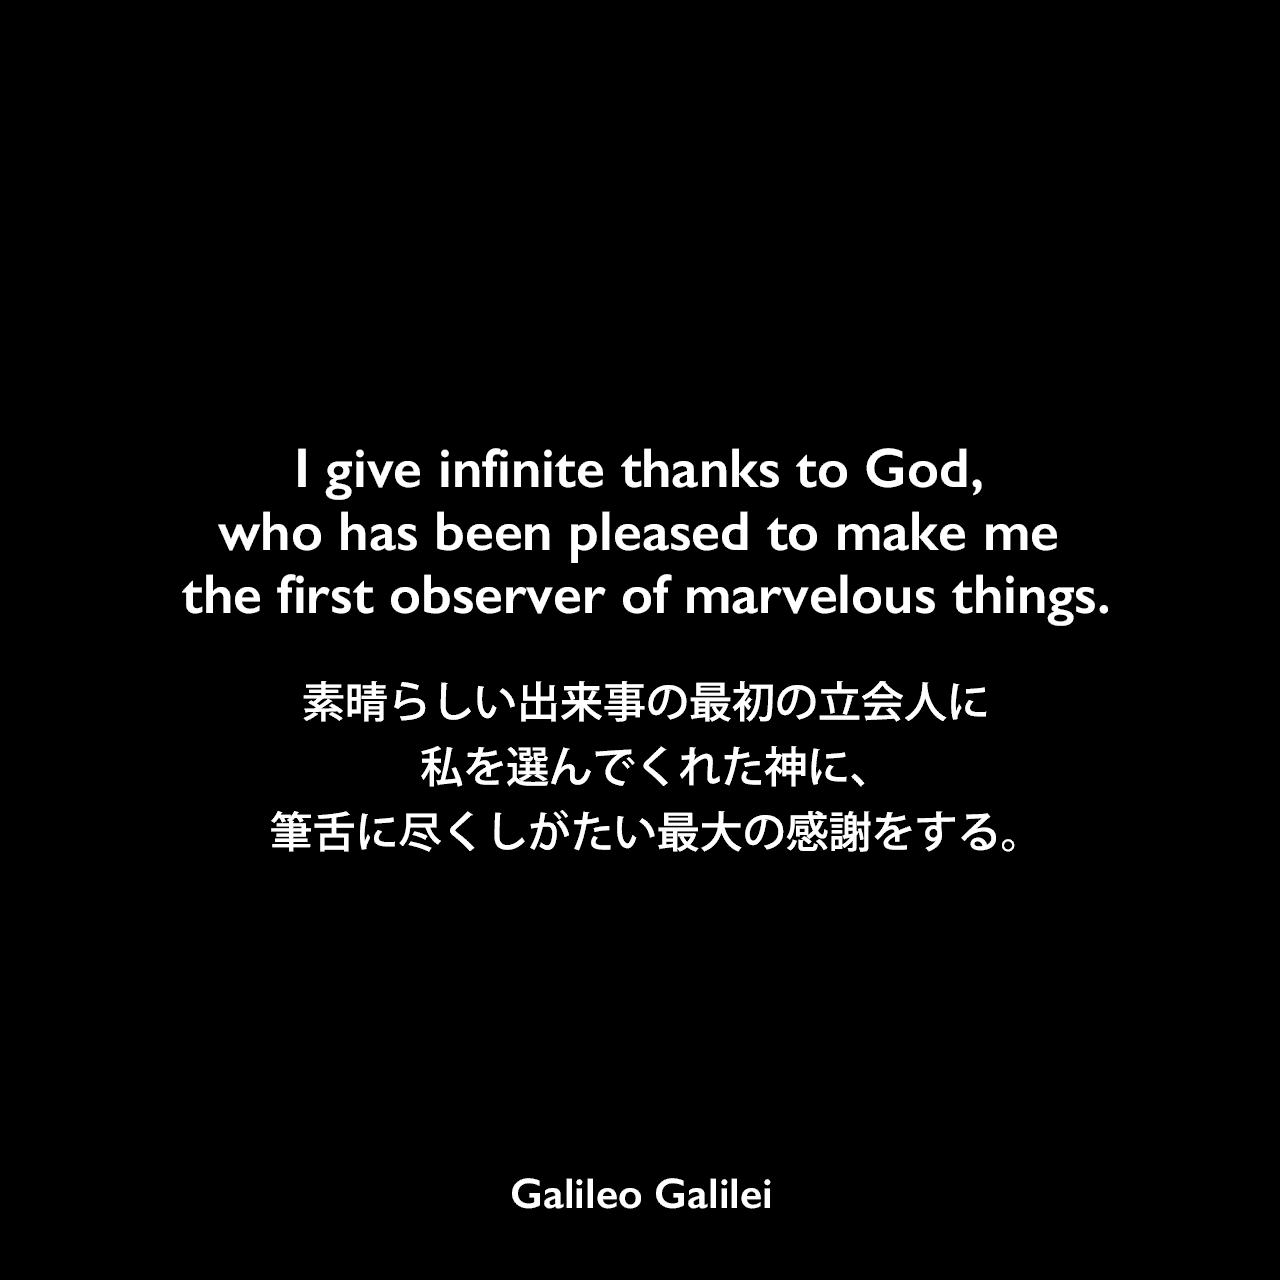 I give infinite thanks to God, who has been pleased to make me the first observer of marvelous things.素晴らしい出来事の最初の立会人、私を選んでくれた神に、筆舌に尽くしがたい最大の感謝をする。Galileo Galilei